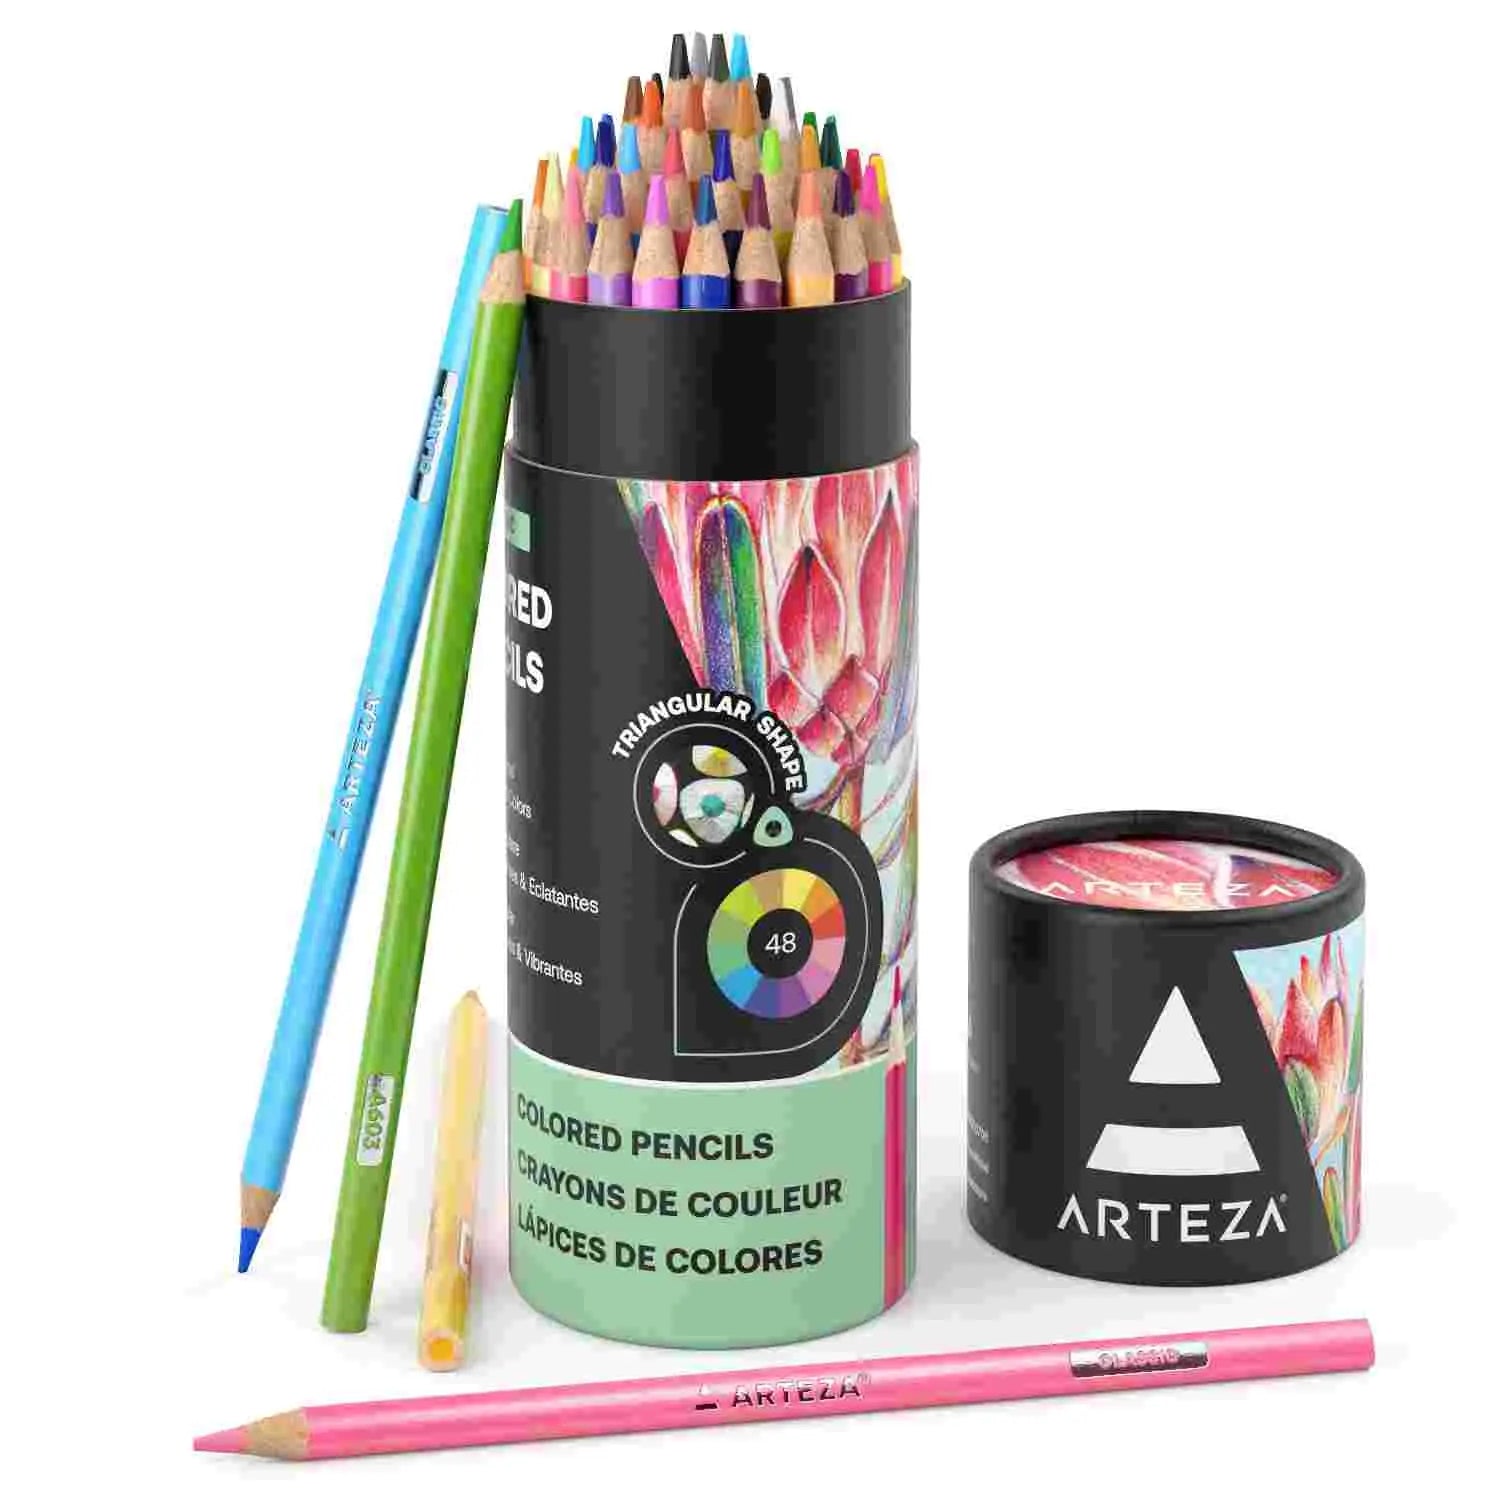 http://canvazo.com/cdn/shop/files/ARTEZA-Colored-Pencils-for-Adult-Coloring_-48-Colors_-Soft-Drawing-Pencils_-Highly-Pigmented_-Wax-Based-Core_-Professional-Art-Supplies-for-Artists_-Pencil-Set-for-Adults-and-Teens-Ar_eda07b5b-61c7-438b-bff2-4b3841f7ac39.jpg?v=1695380927